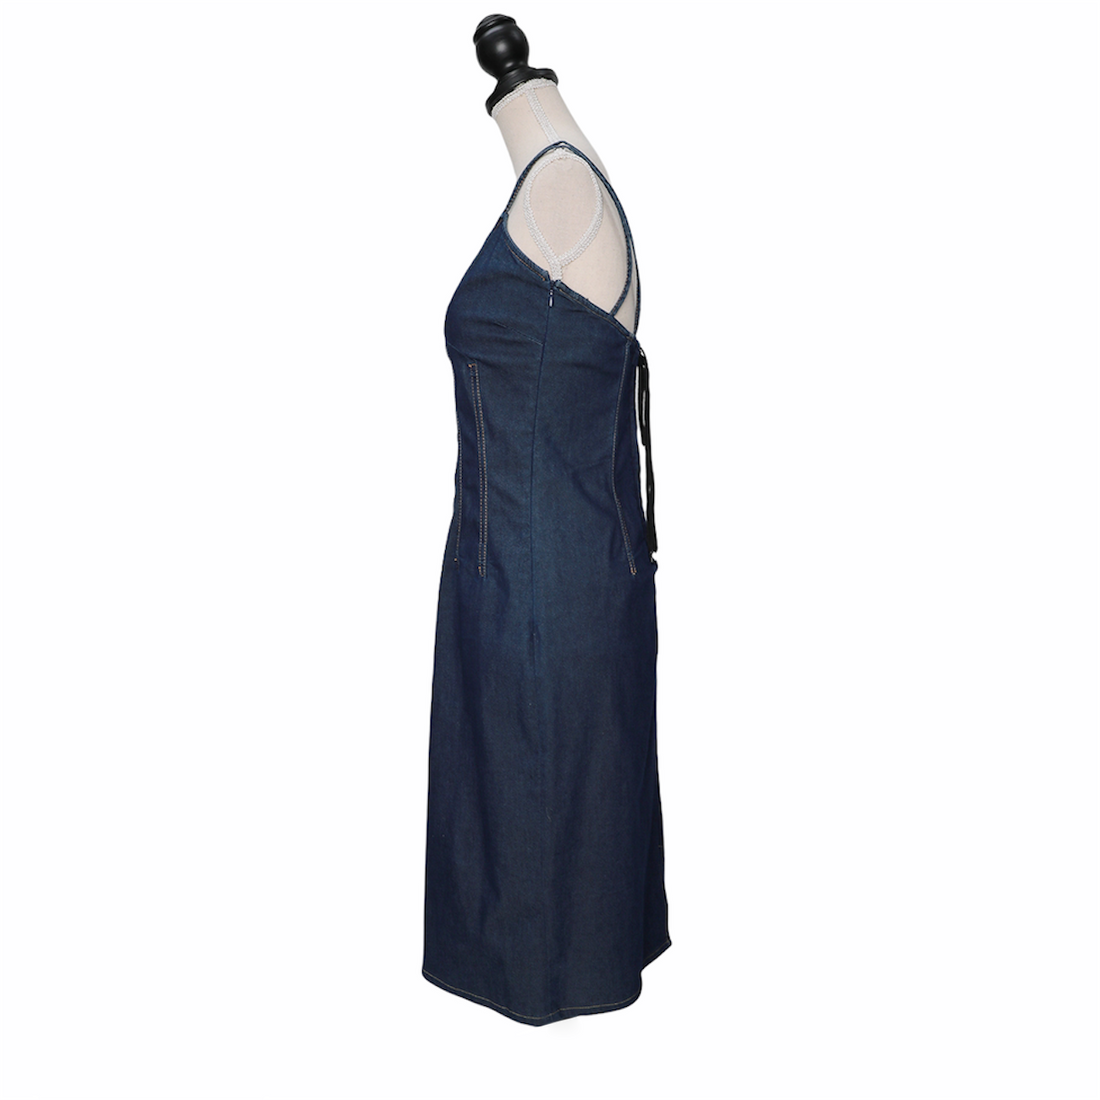 D&amp;G denim corsage dress with lacing details on the back